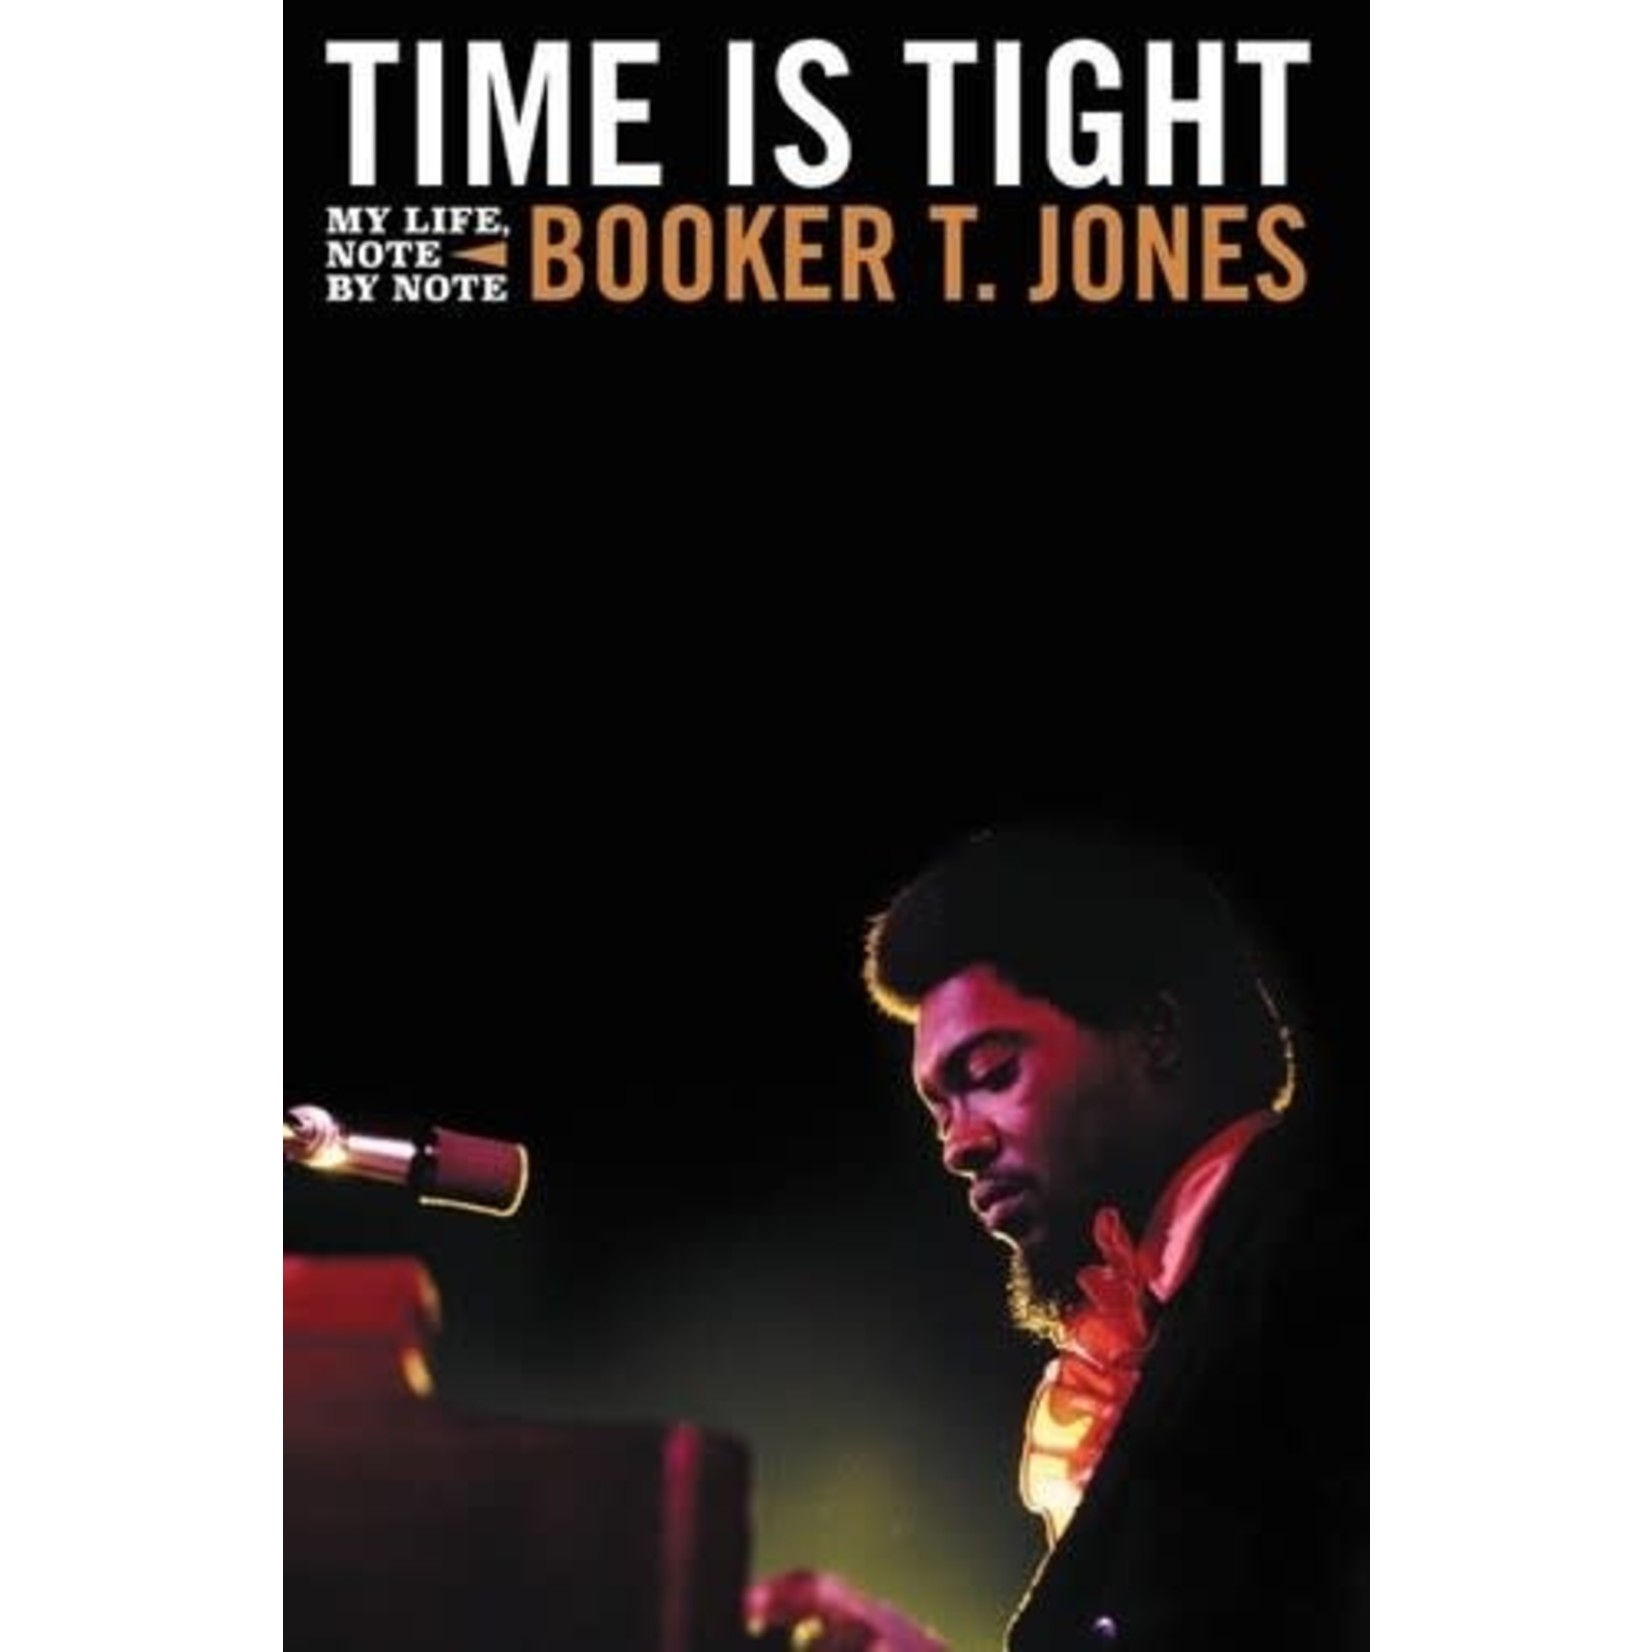 Stax Booker T Jones - Time Is Tight: My Life, Note by Note (Book)